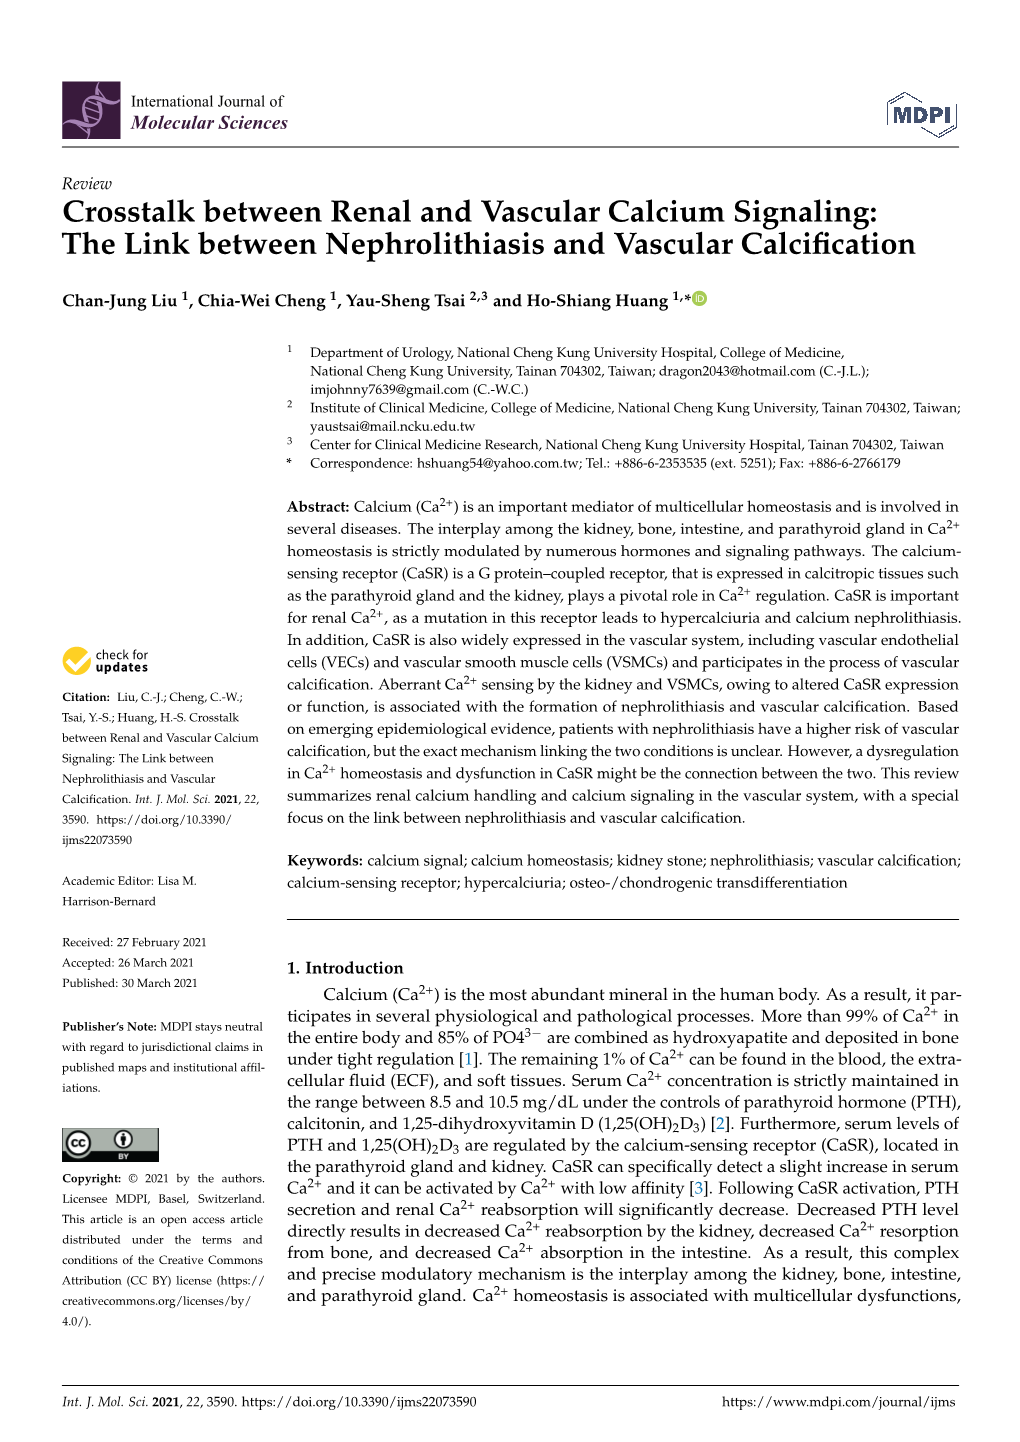 The Link Between Nephrolithiasis and Vascular Calcification